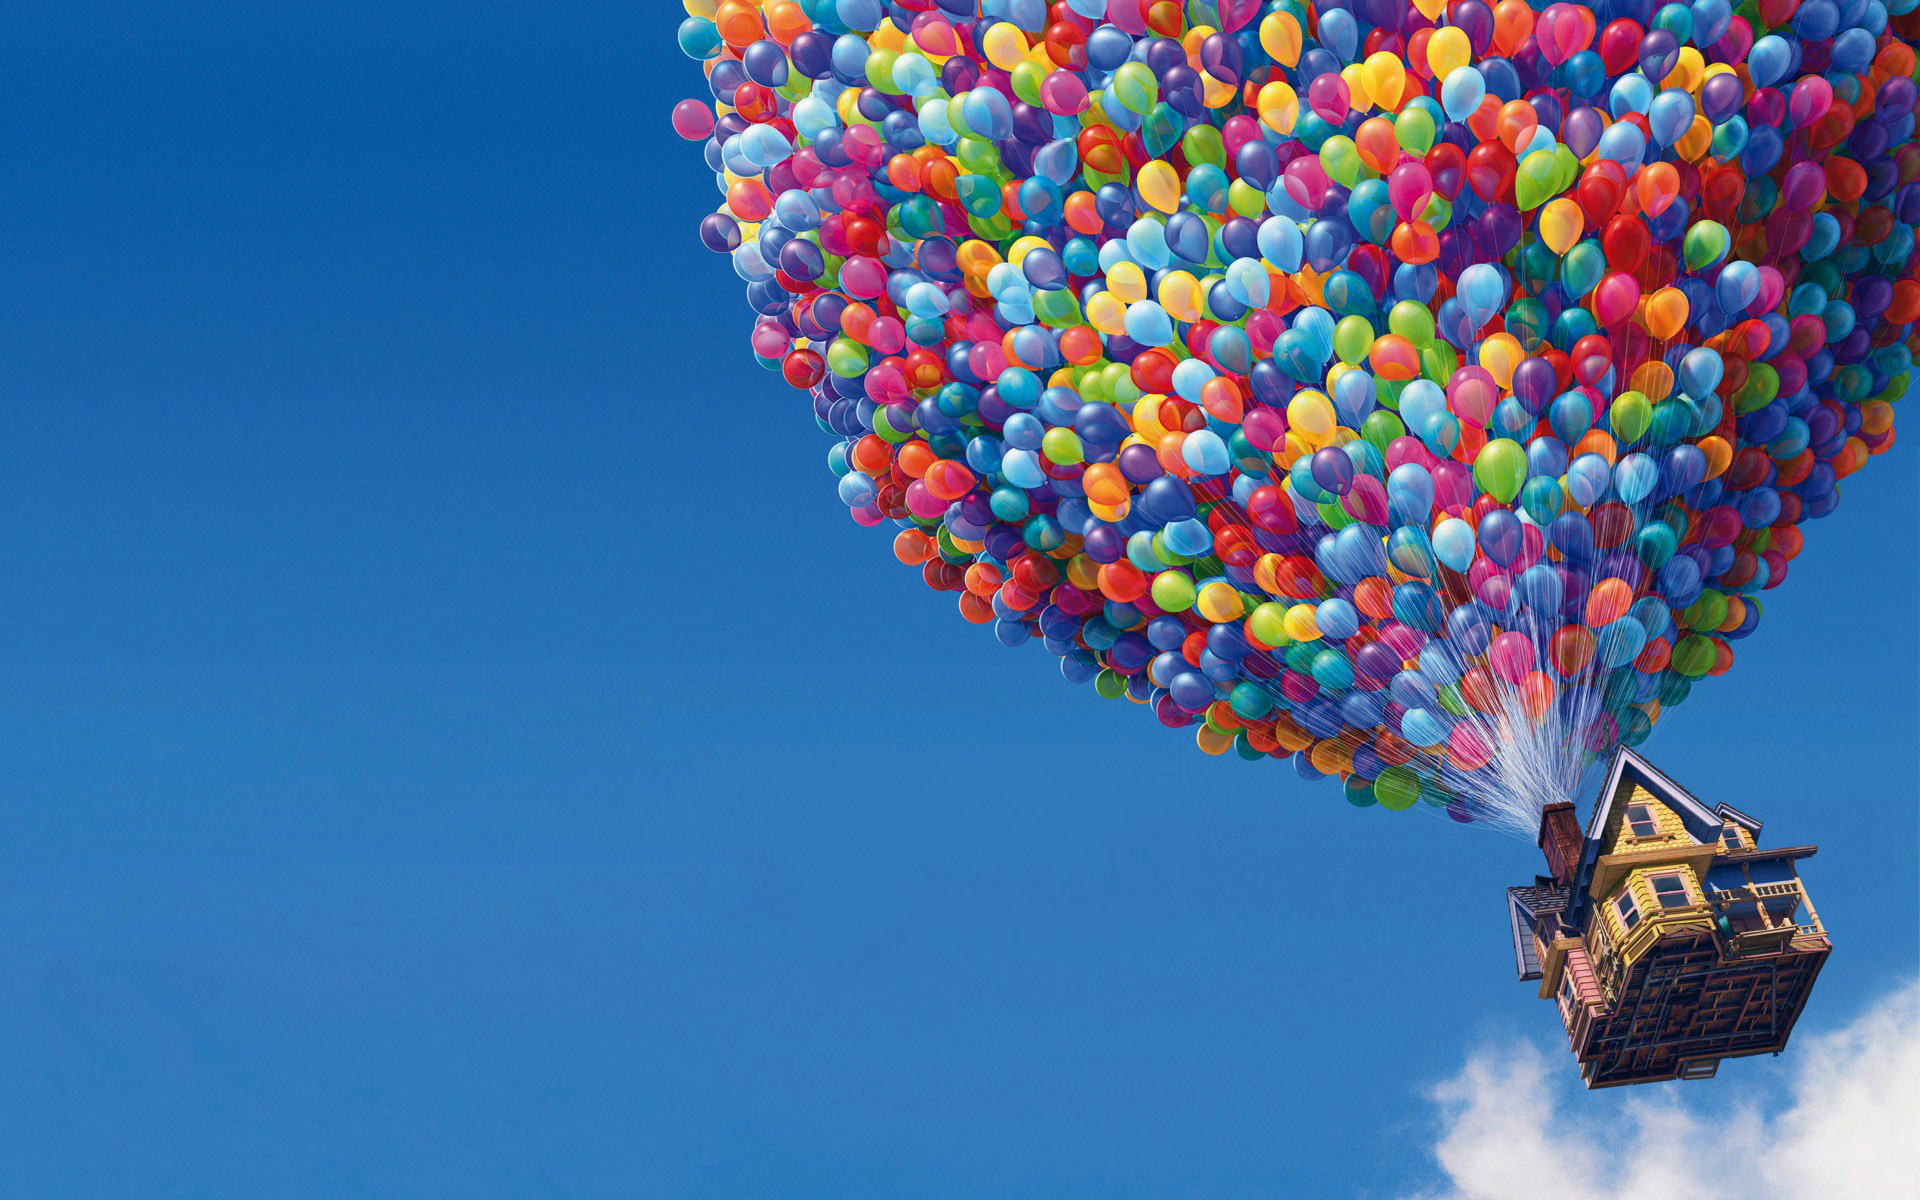 UP Movie Balloons House Wallpapers HD Wallpapers 1920x1200